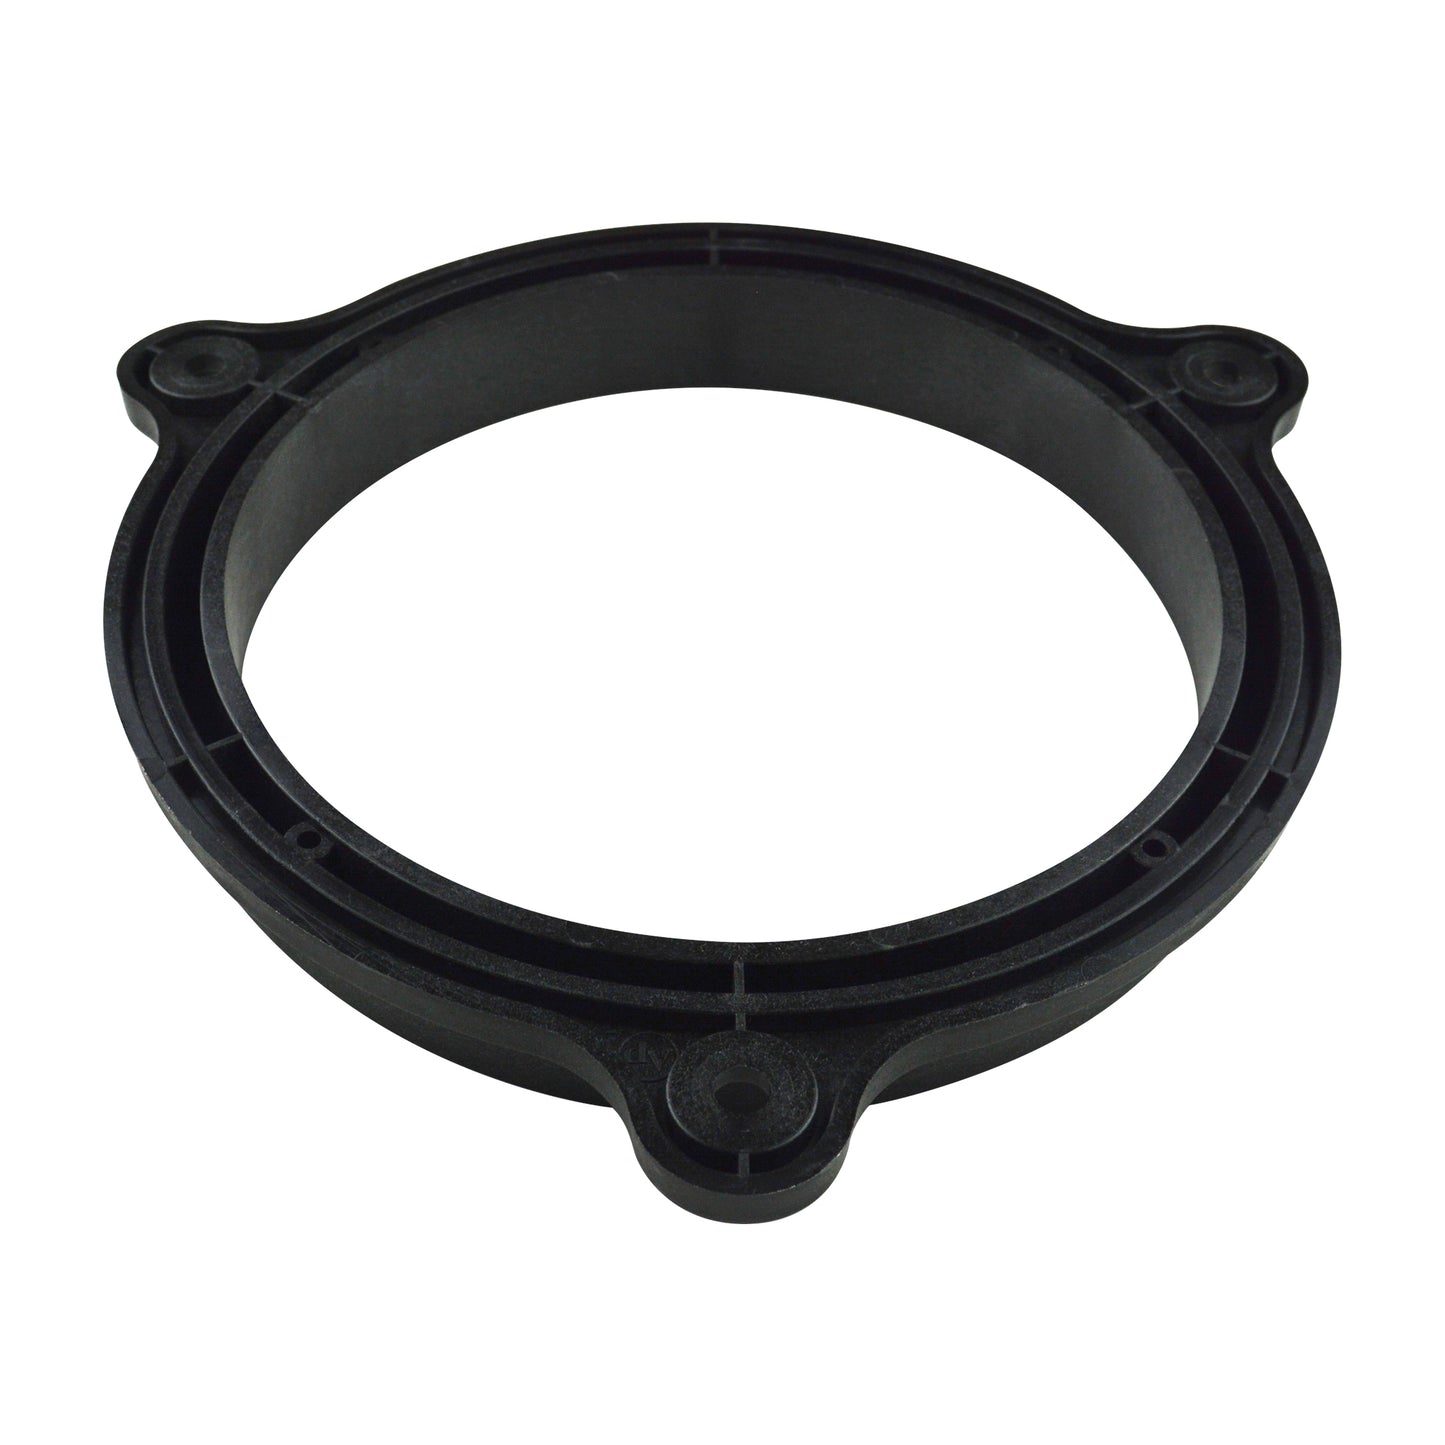 Installation Solution - Factory Car Speaker to Aftermarket Speaker Adapter/Spacer for NISSAN (RING-PVC-NI-6)